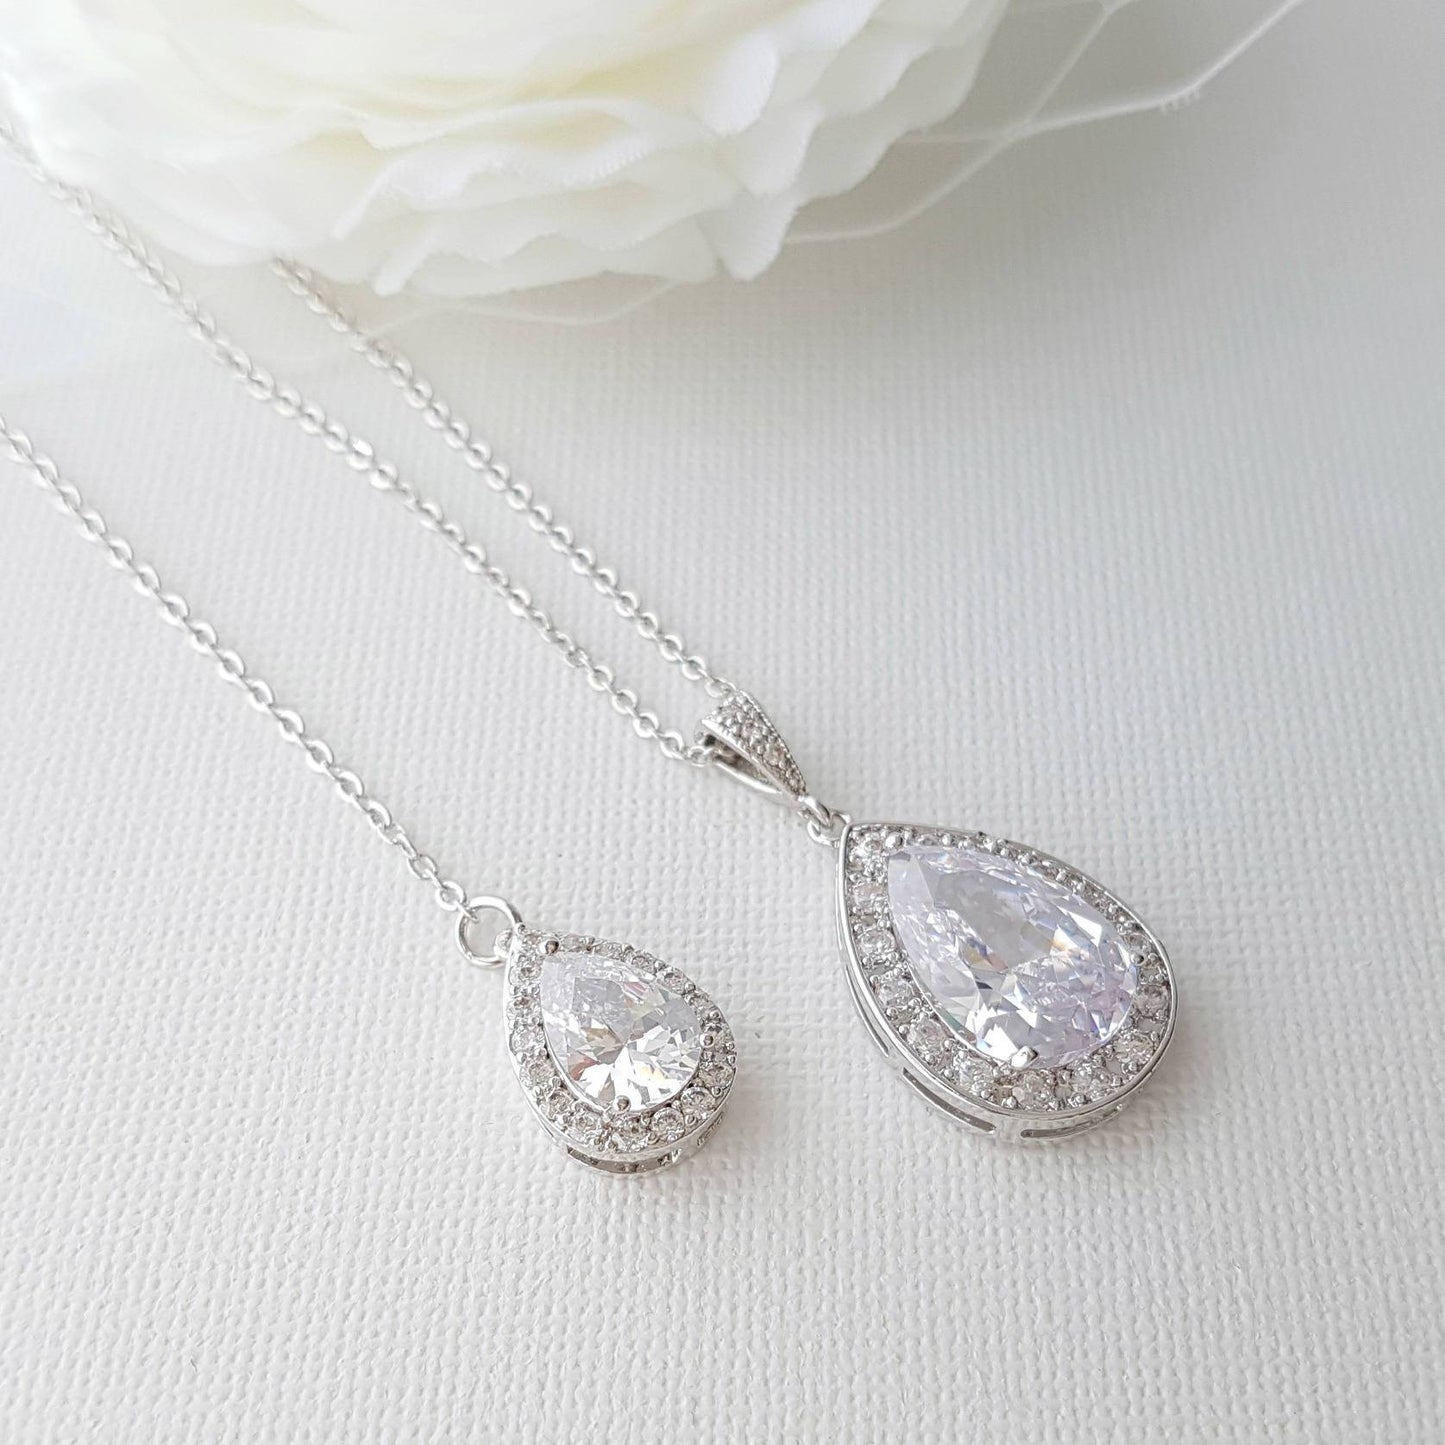 Simple Wedding Back Necklace, Crystal Backdrop Bridal Necklace, Crystal Drop Necklace, Bridesmaid Necklace Gift, Bridal Jewelry, Evelyn - PoetryDesigns